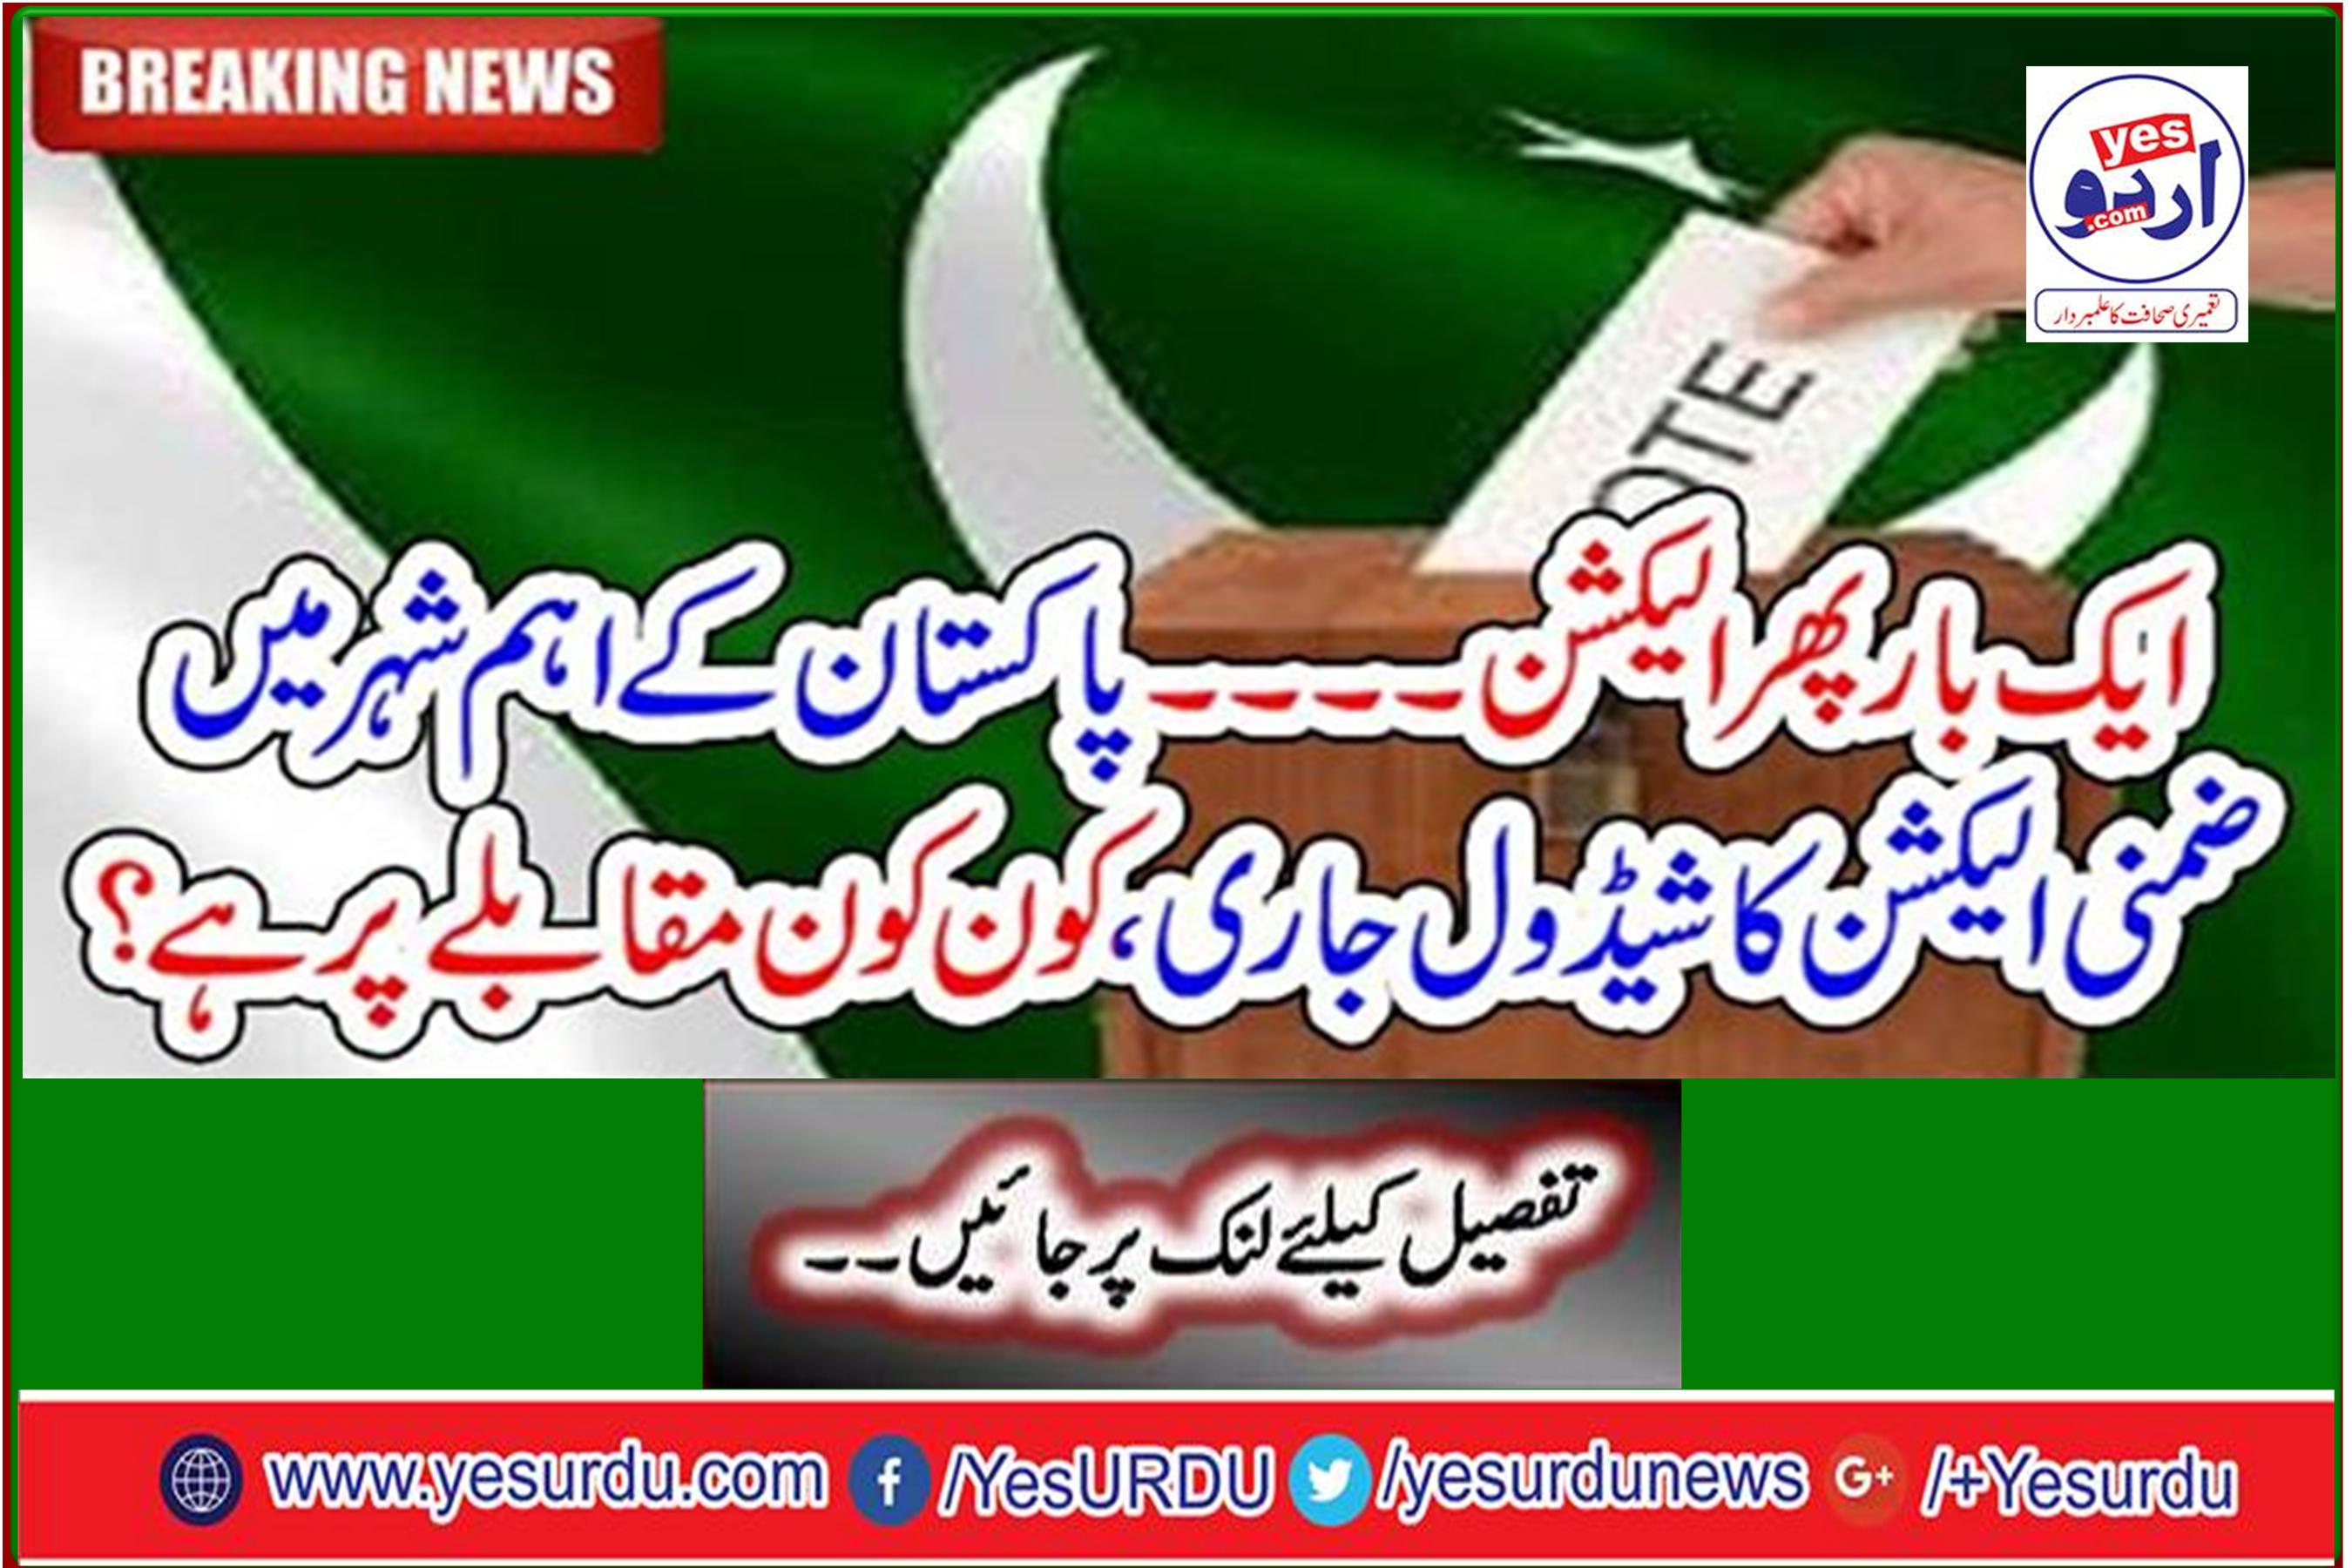 Breaking News: Election Again ... By-elections in major cities of Pakistan are underway, who is competing?